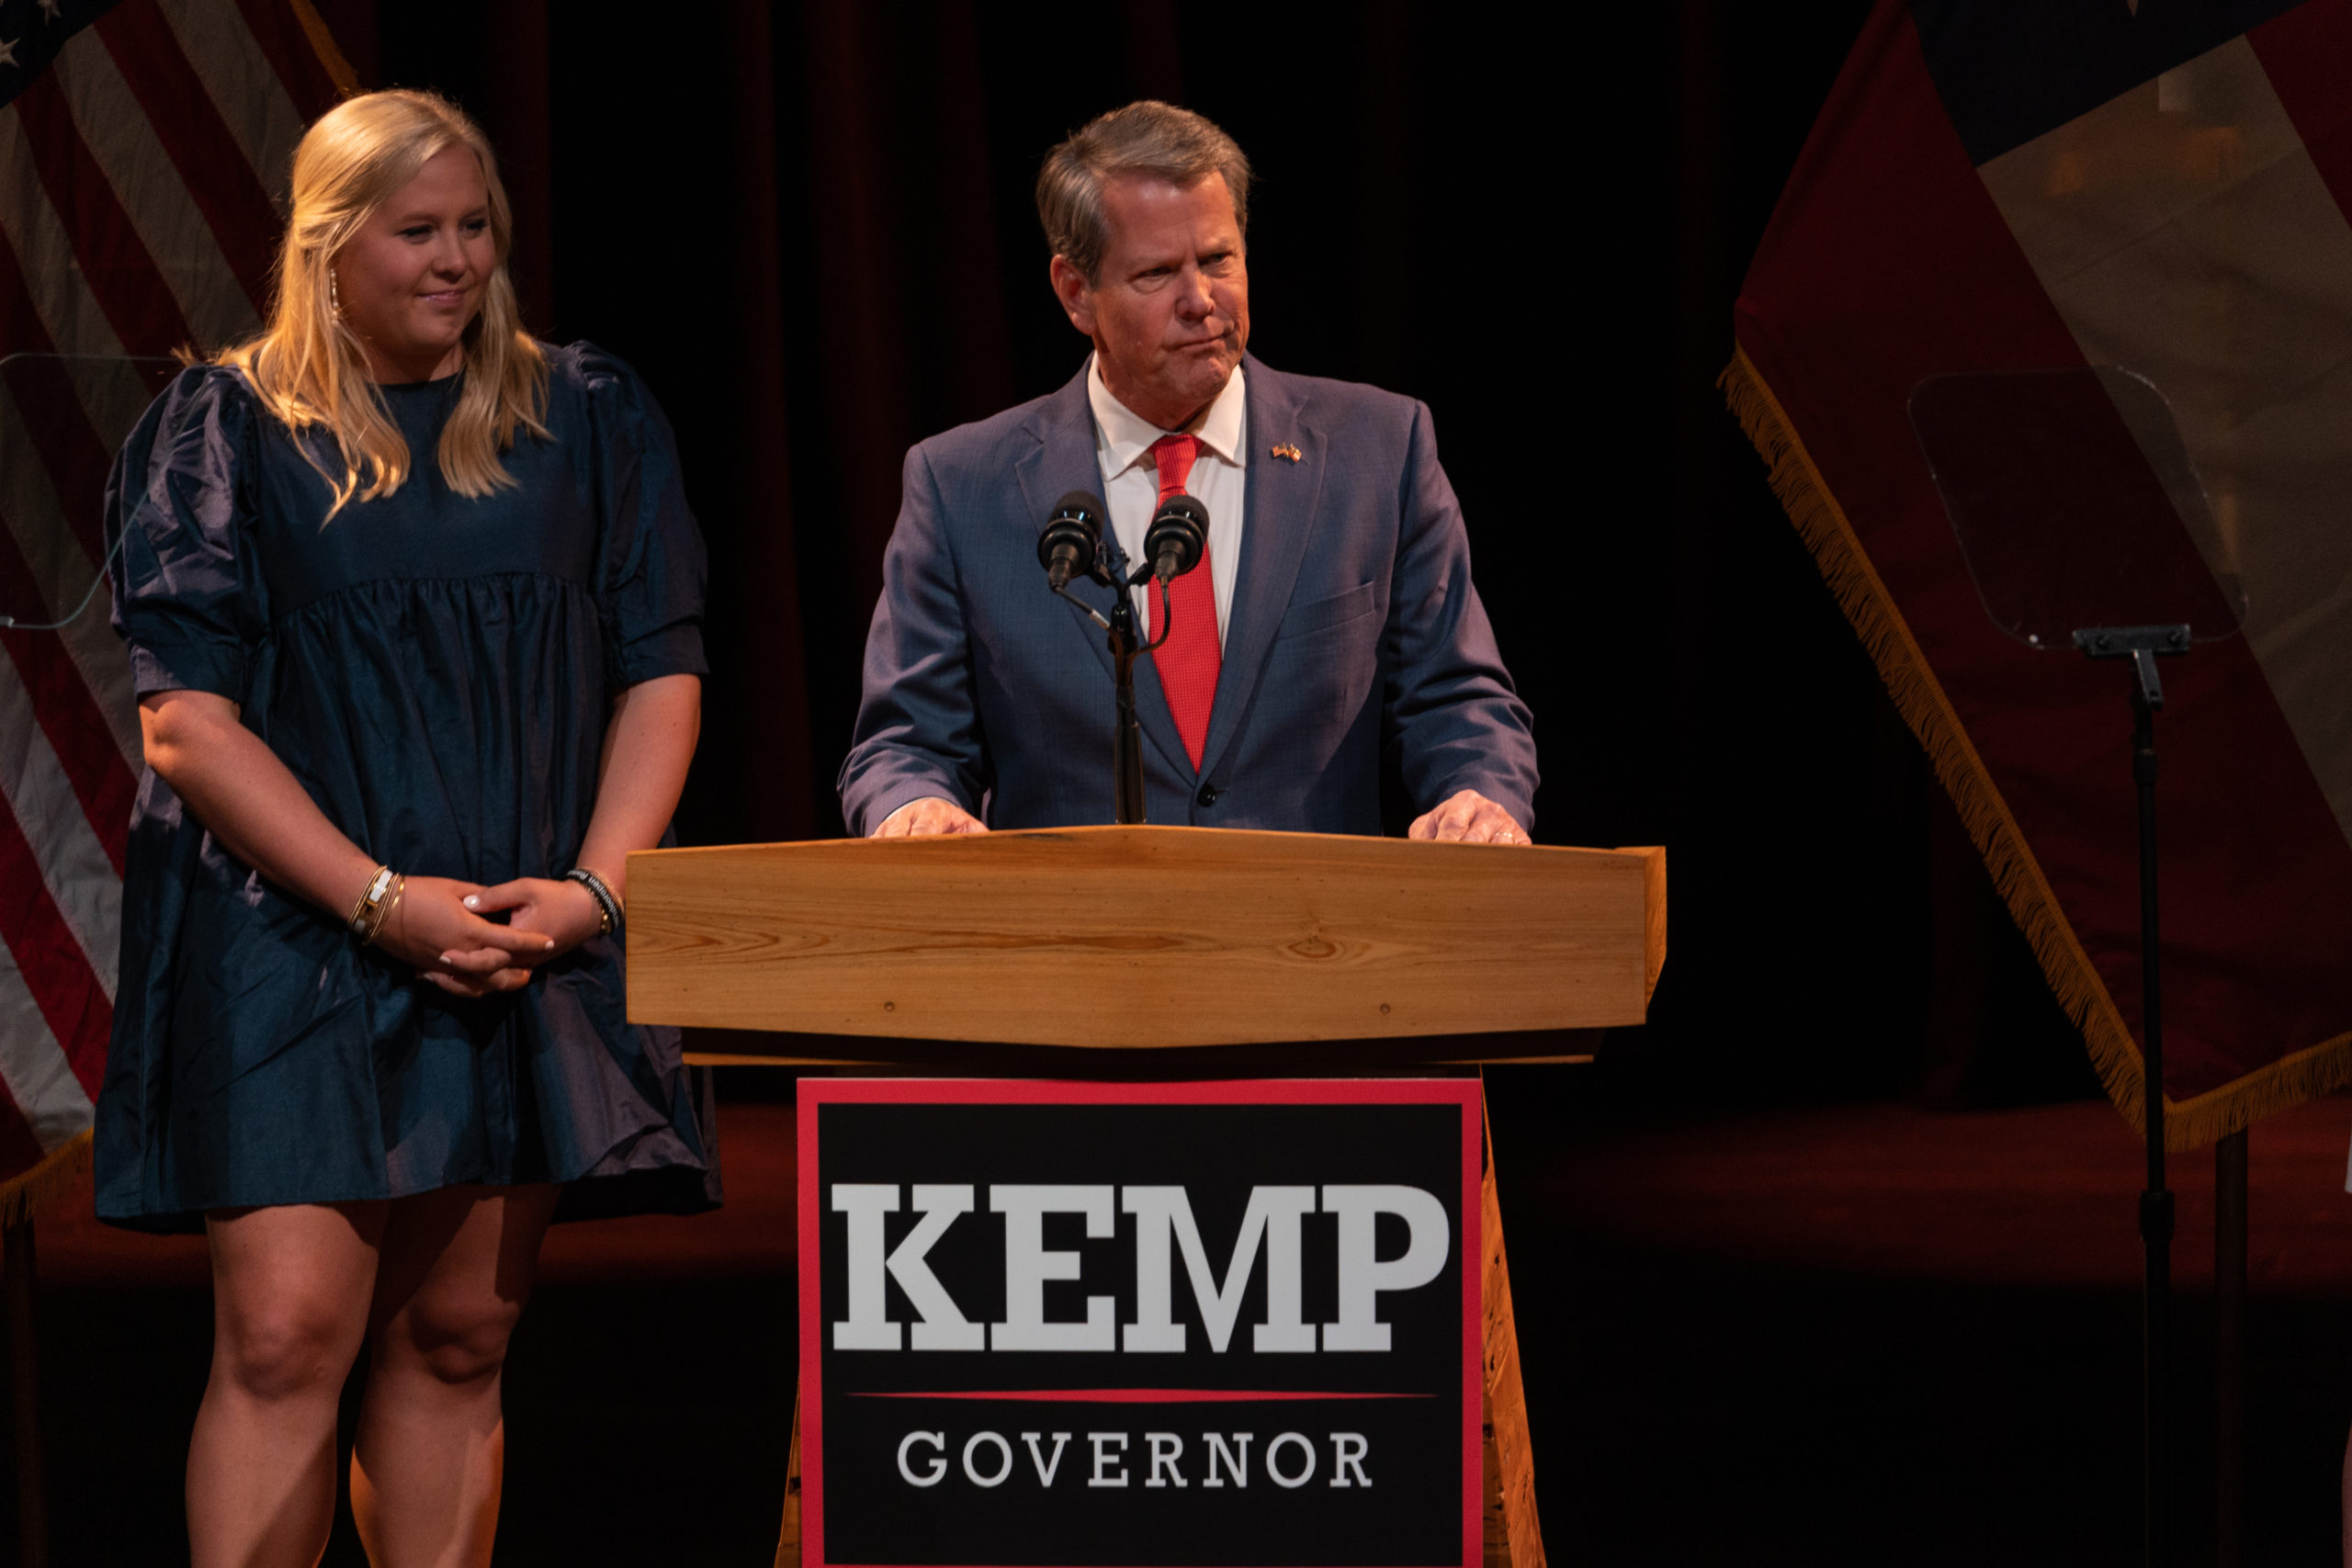 Republican Gov. Brian Kemp addresses supporters at a watch party after winning re-election on election night on November 8, 2022 in Atlanta, Georgia. Kemp defeated Democratic challenger Stacey Abrams in a repeat of their 2018 race. (Photo by Megan Varner/Getty Images)